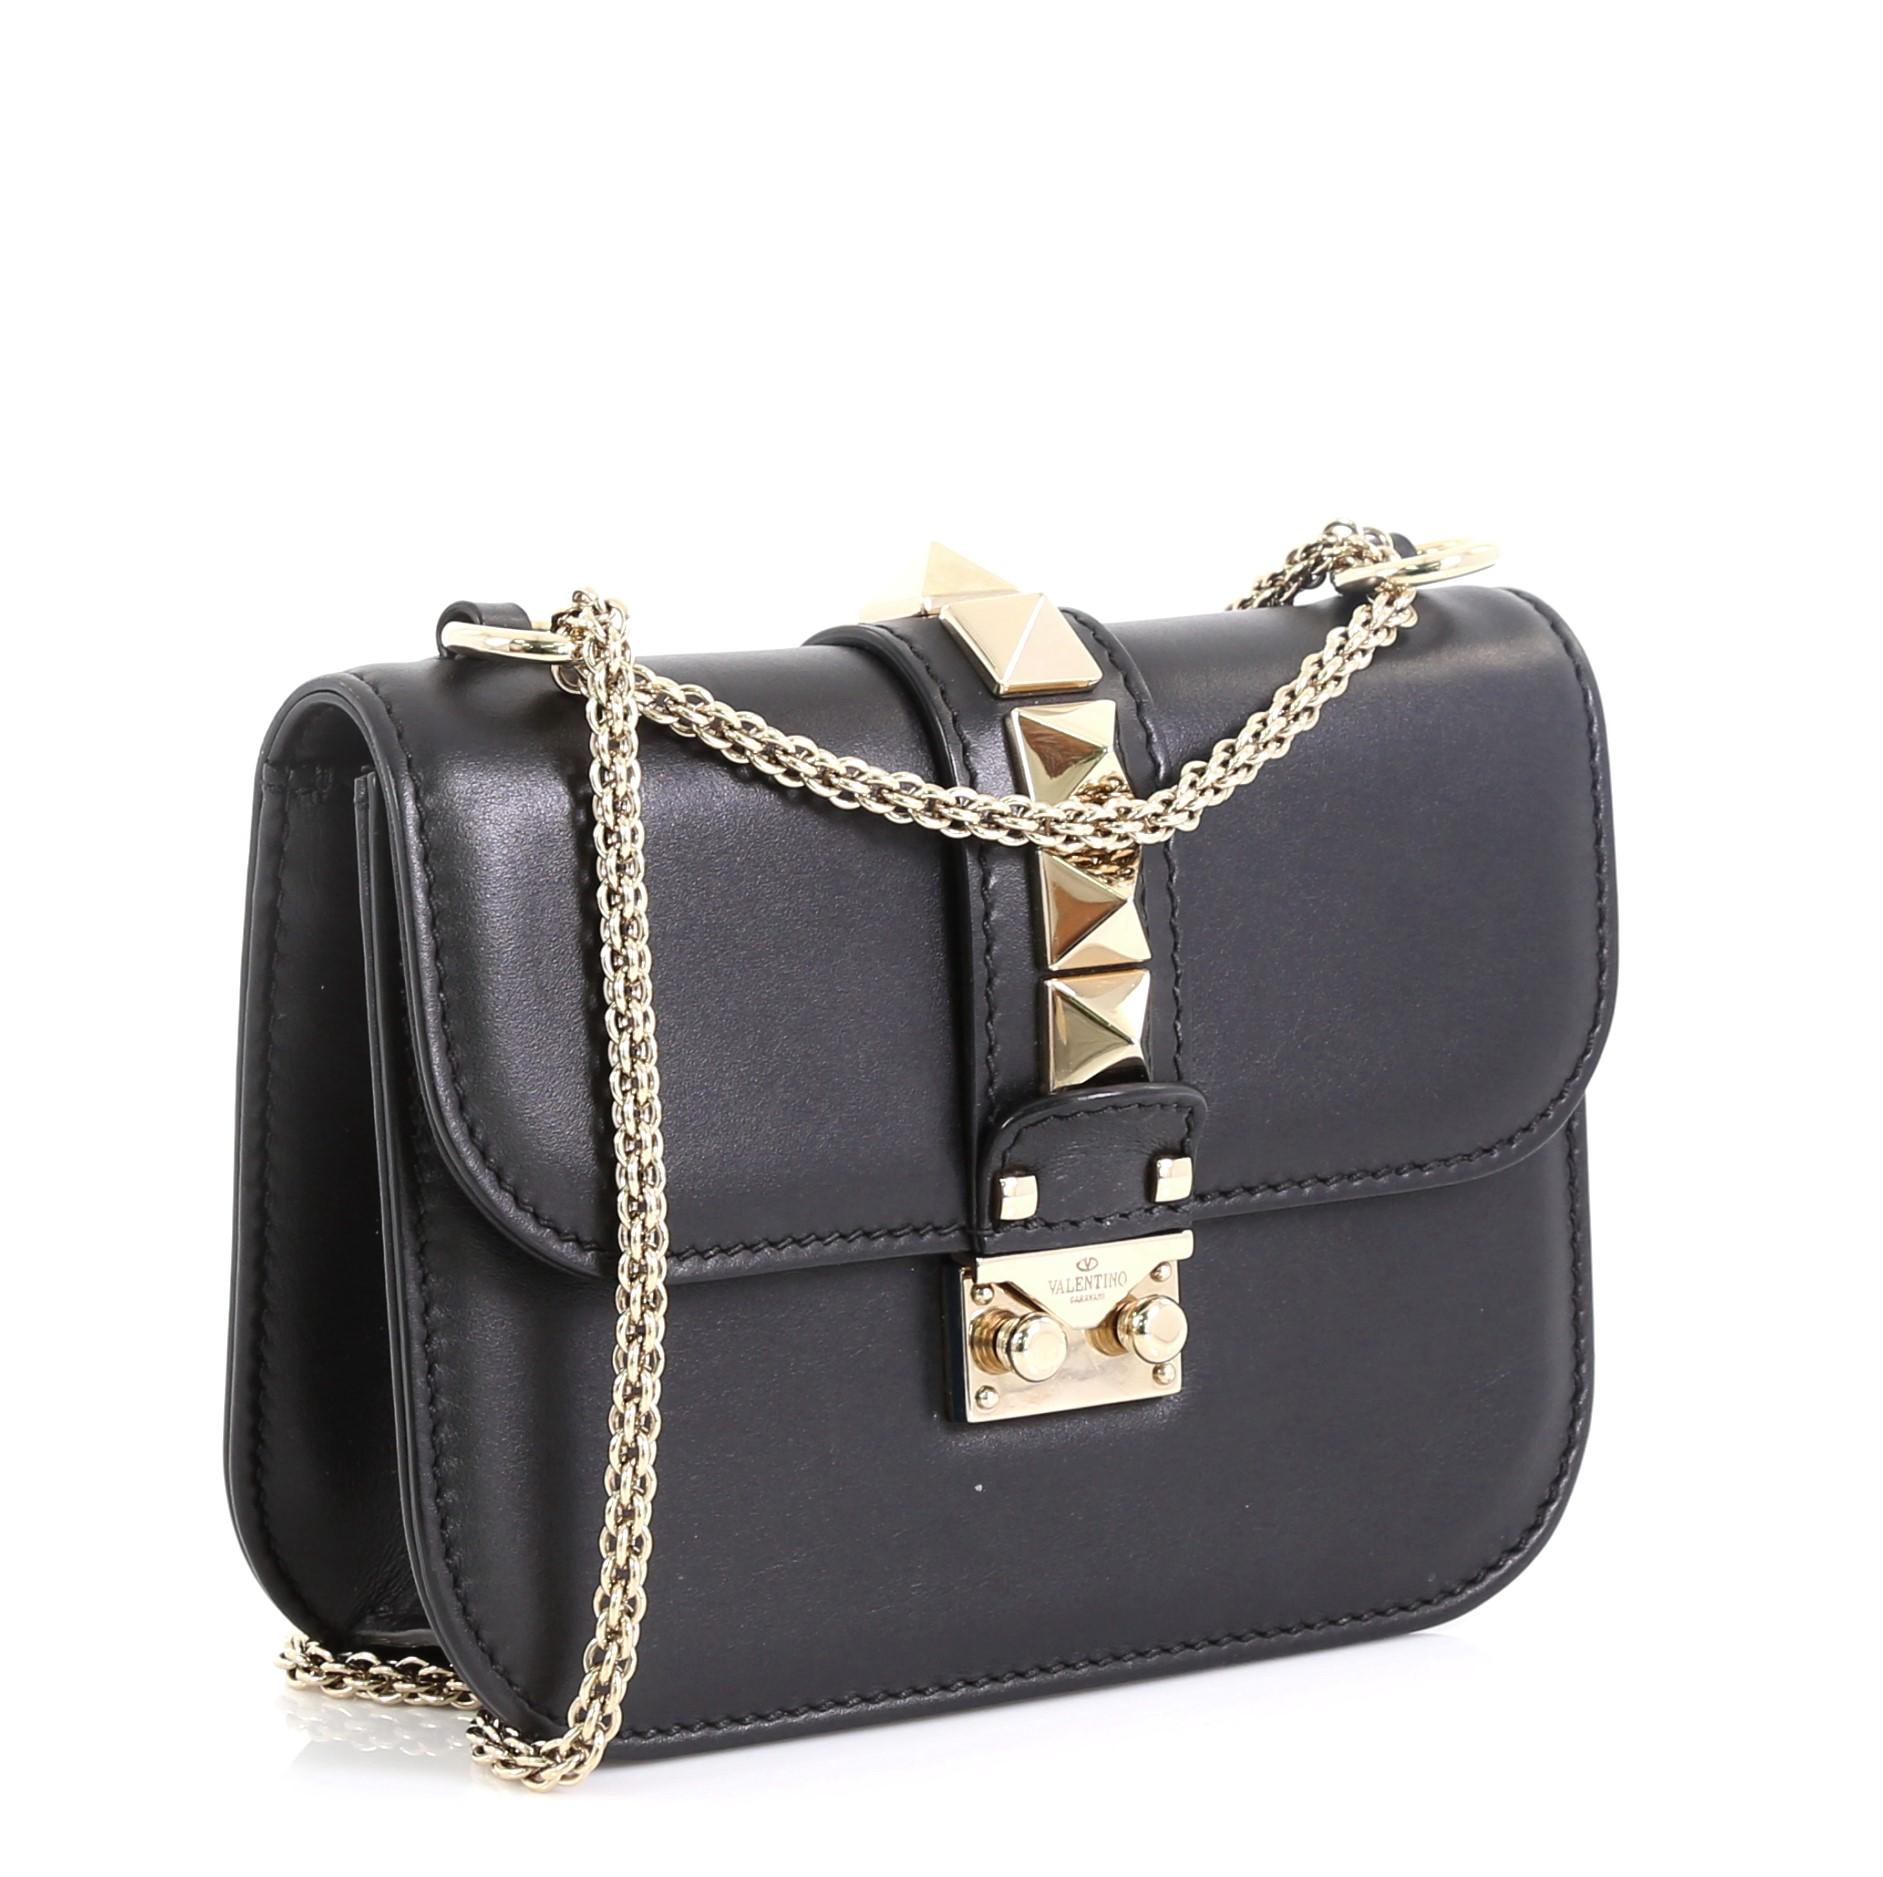 This Valentino Glam Lock Shoulder Bag Leather Small, crafted in black leather, features chain link strap, pyramid studs, and gold-tone hardware. Its push-lock closure opens to a black fabric interior with zip and slip pockets. 

Estimated Retail